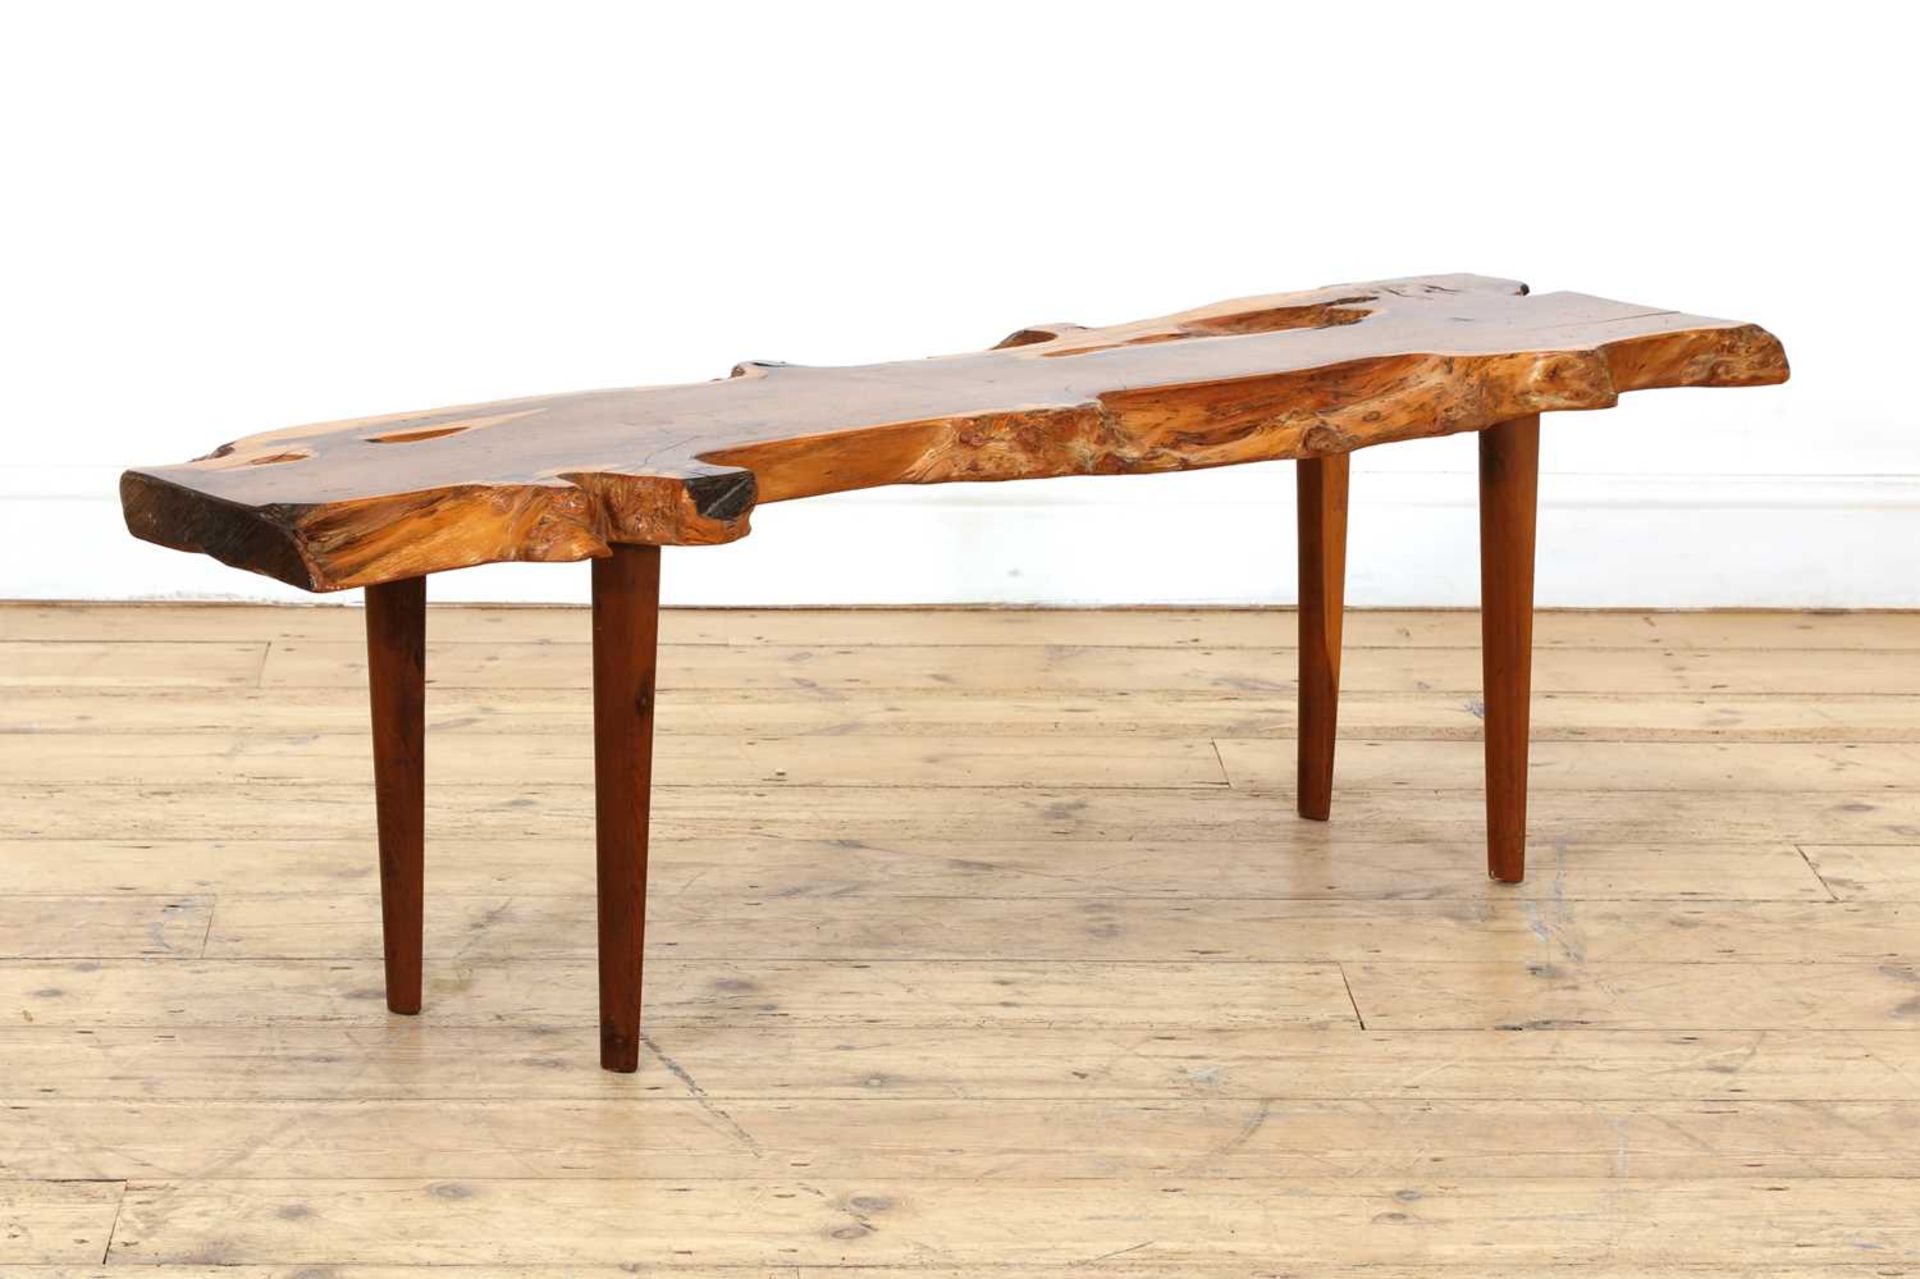 An English yew (Taxus baccata) plank-top coffee table,